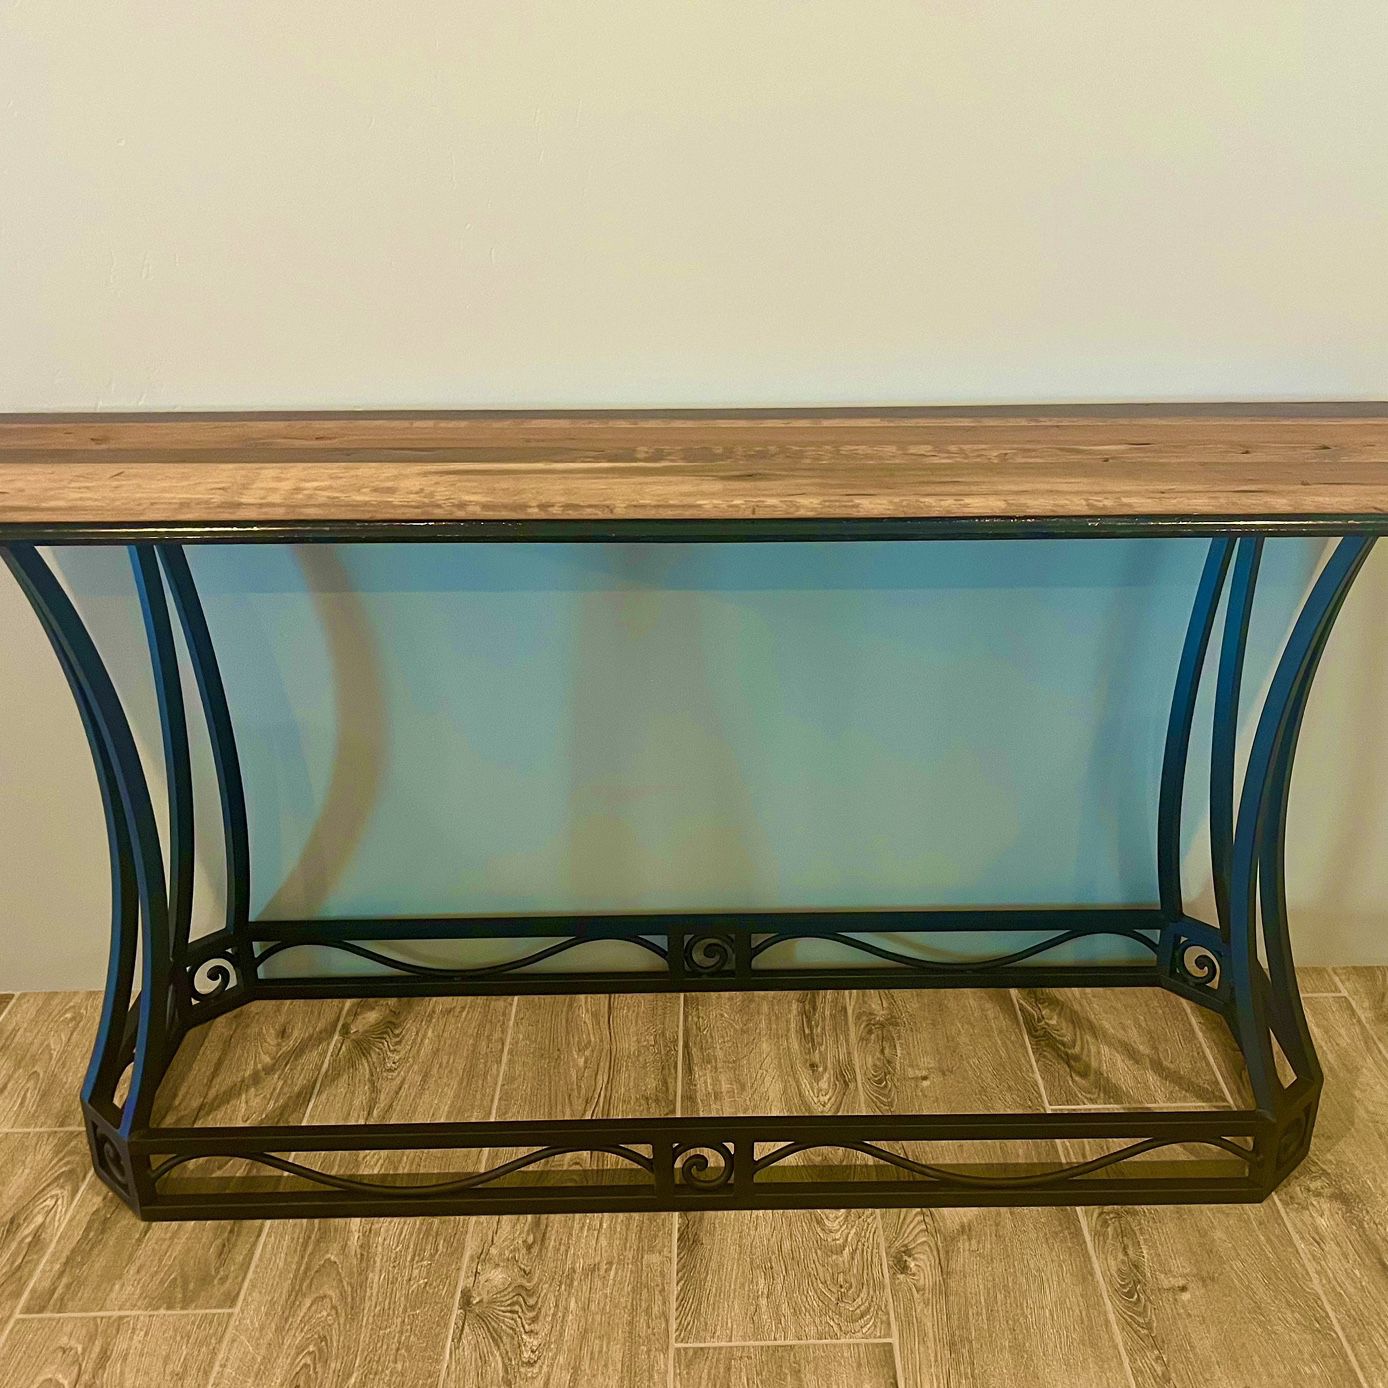 One of a kind unique Entry/Console table made from a 1930s Pianos